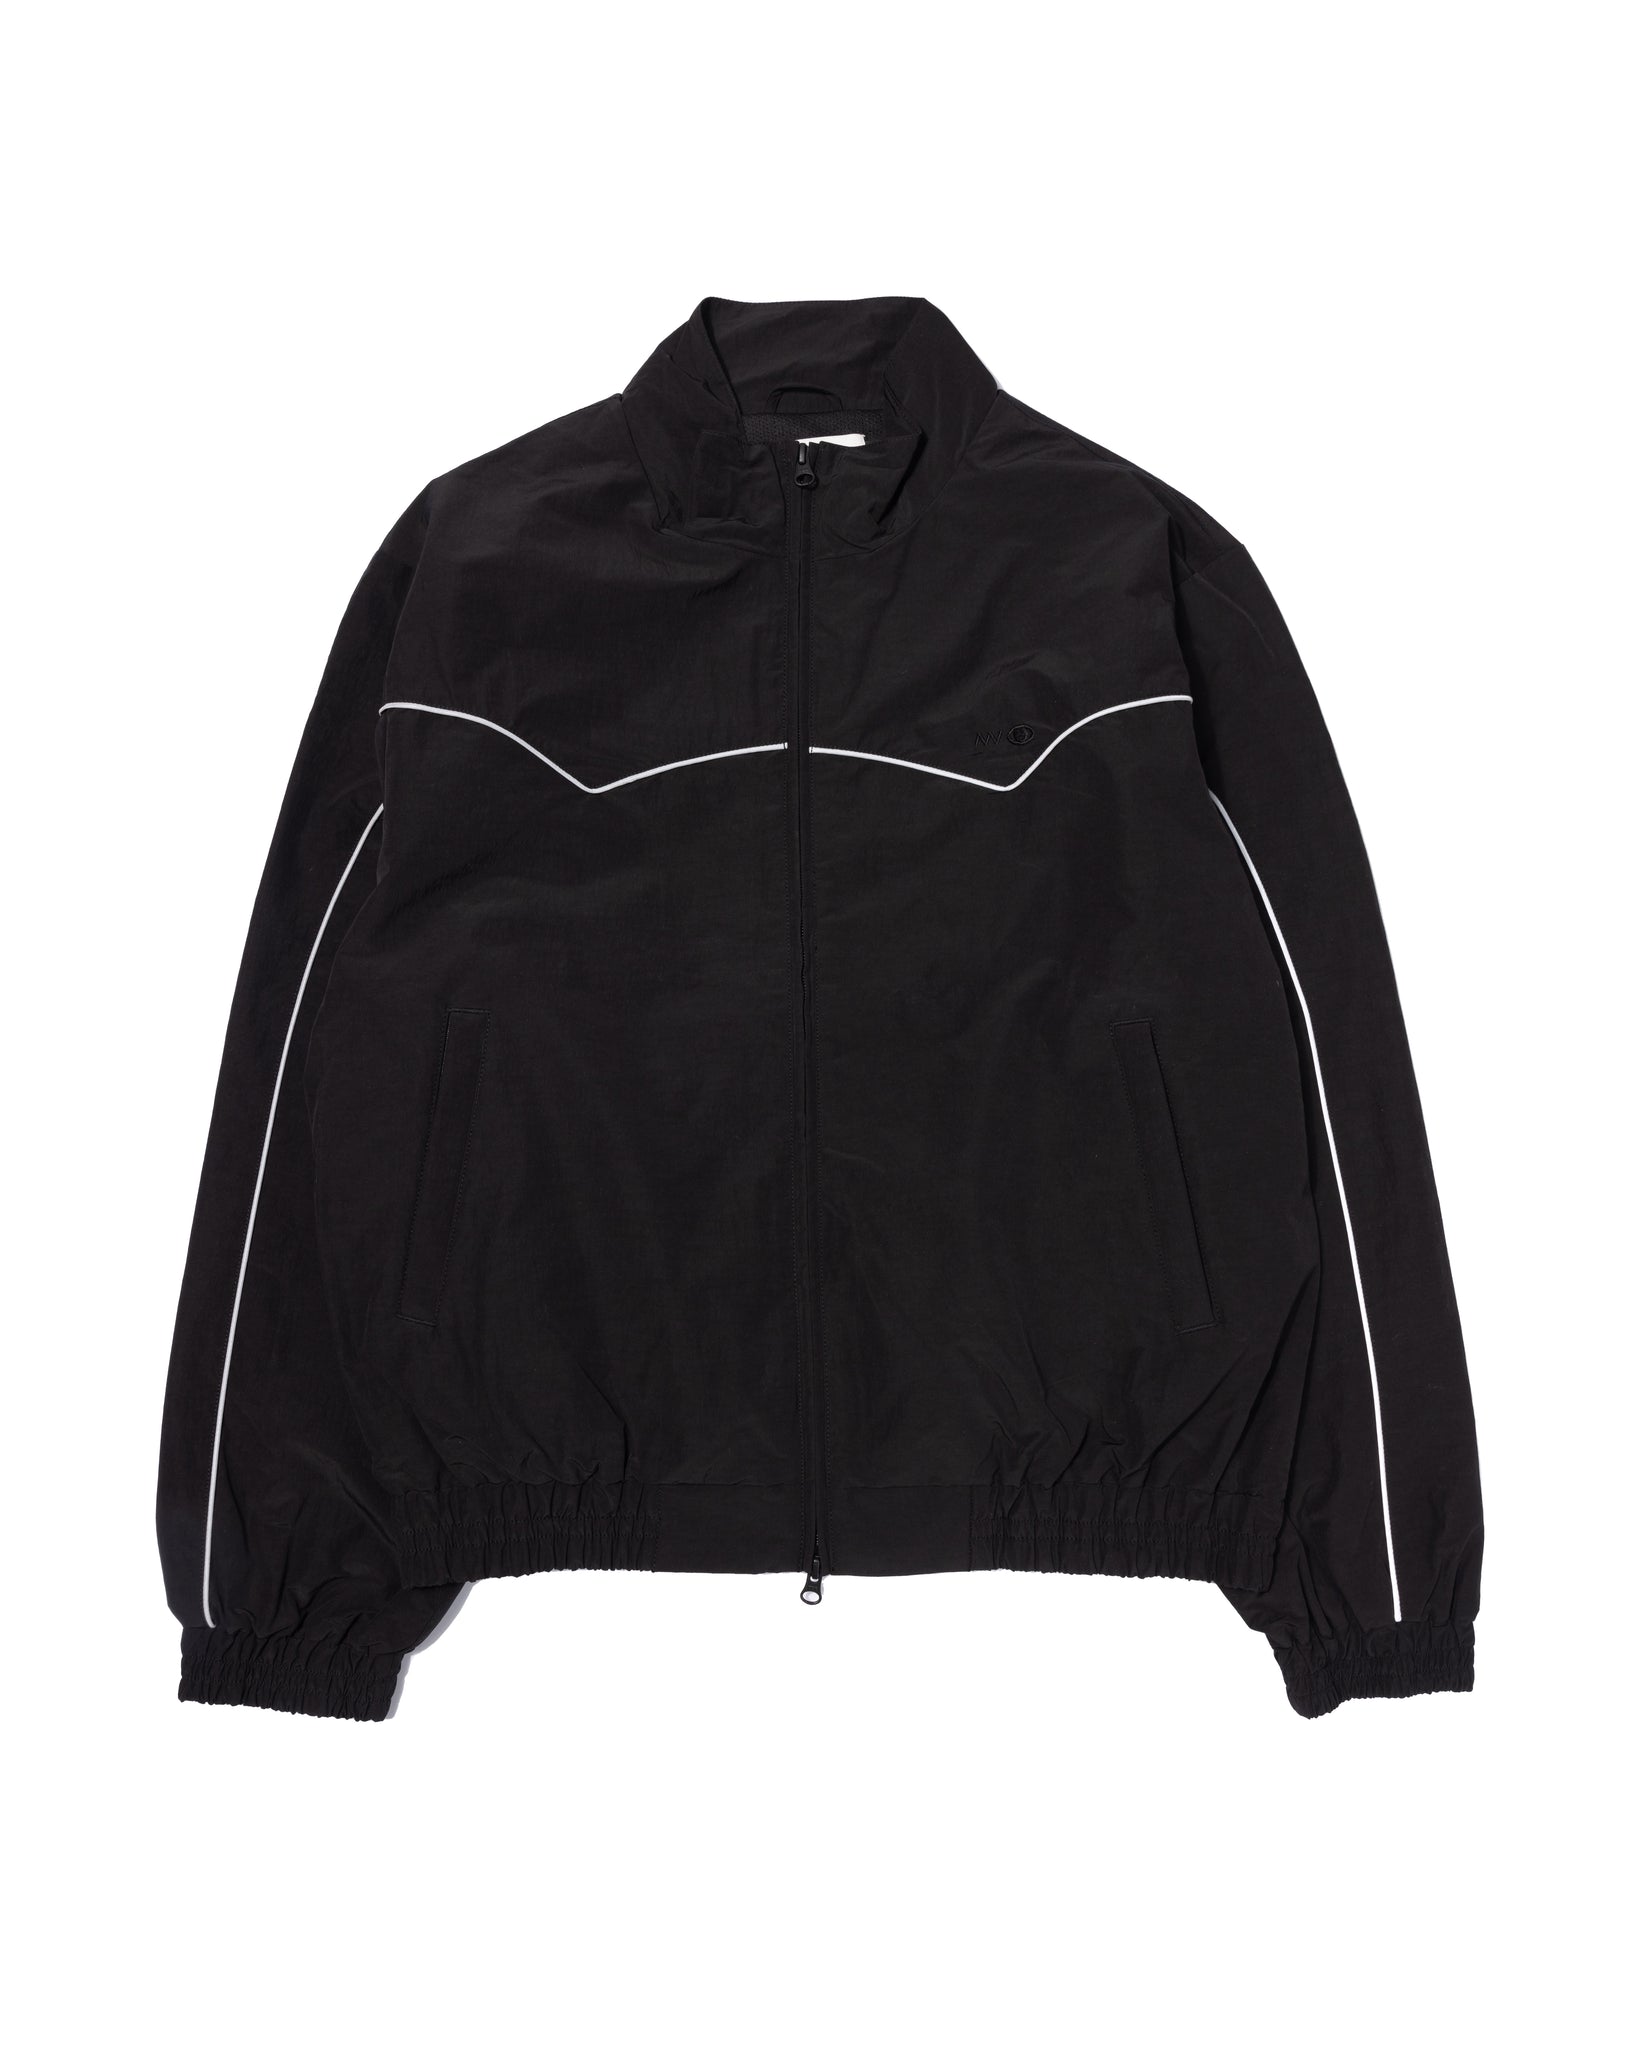 WESTERN TRACK TOP